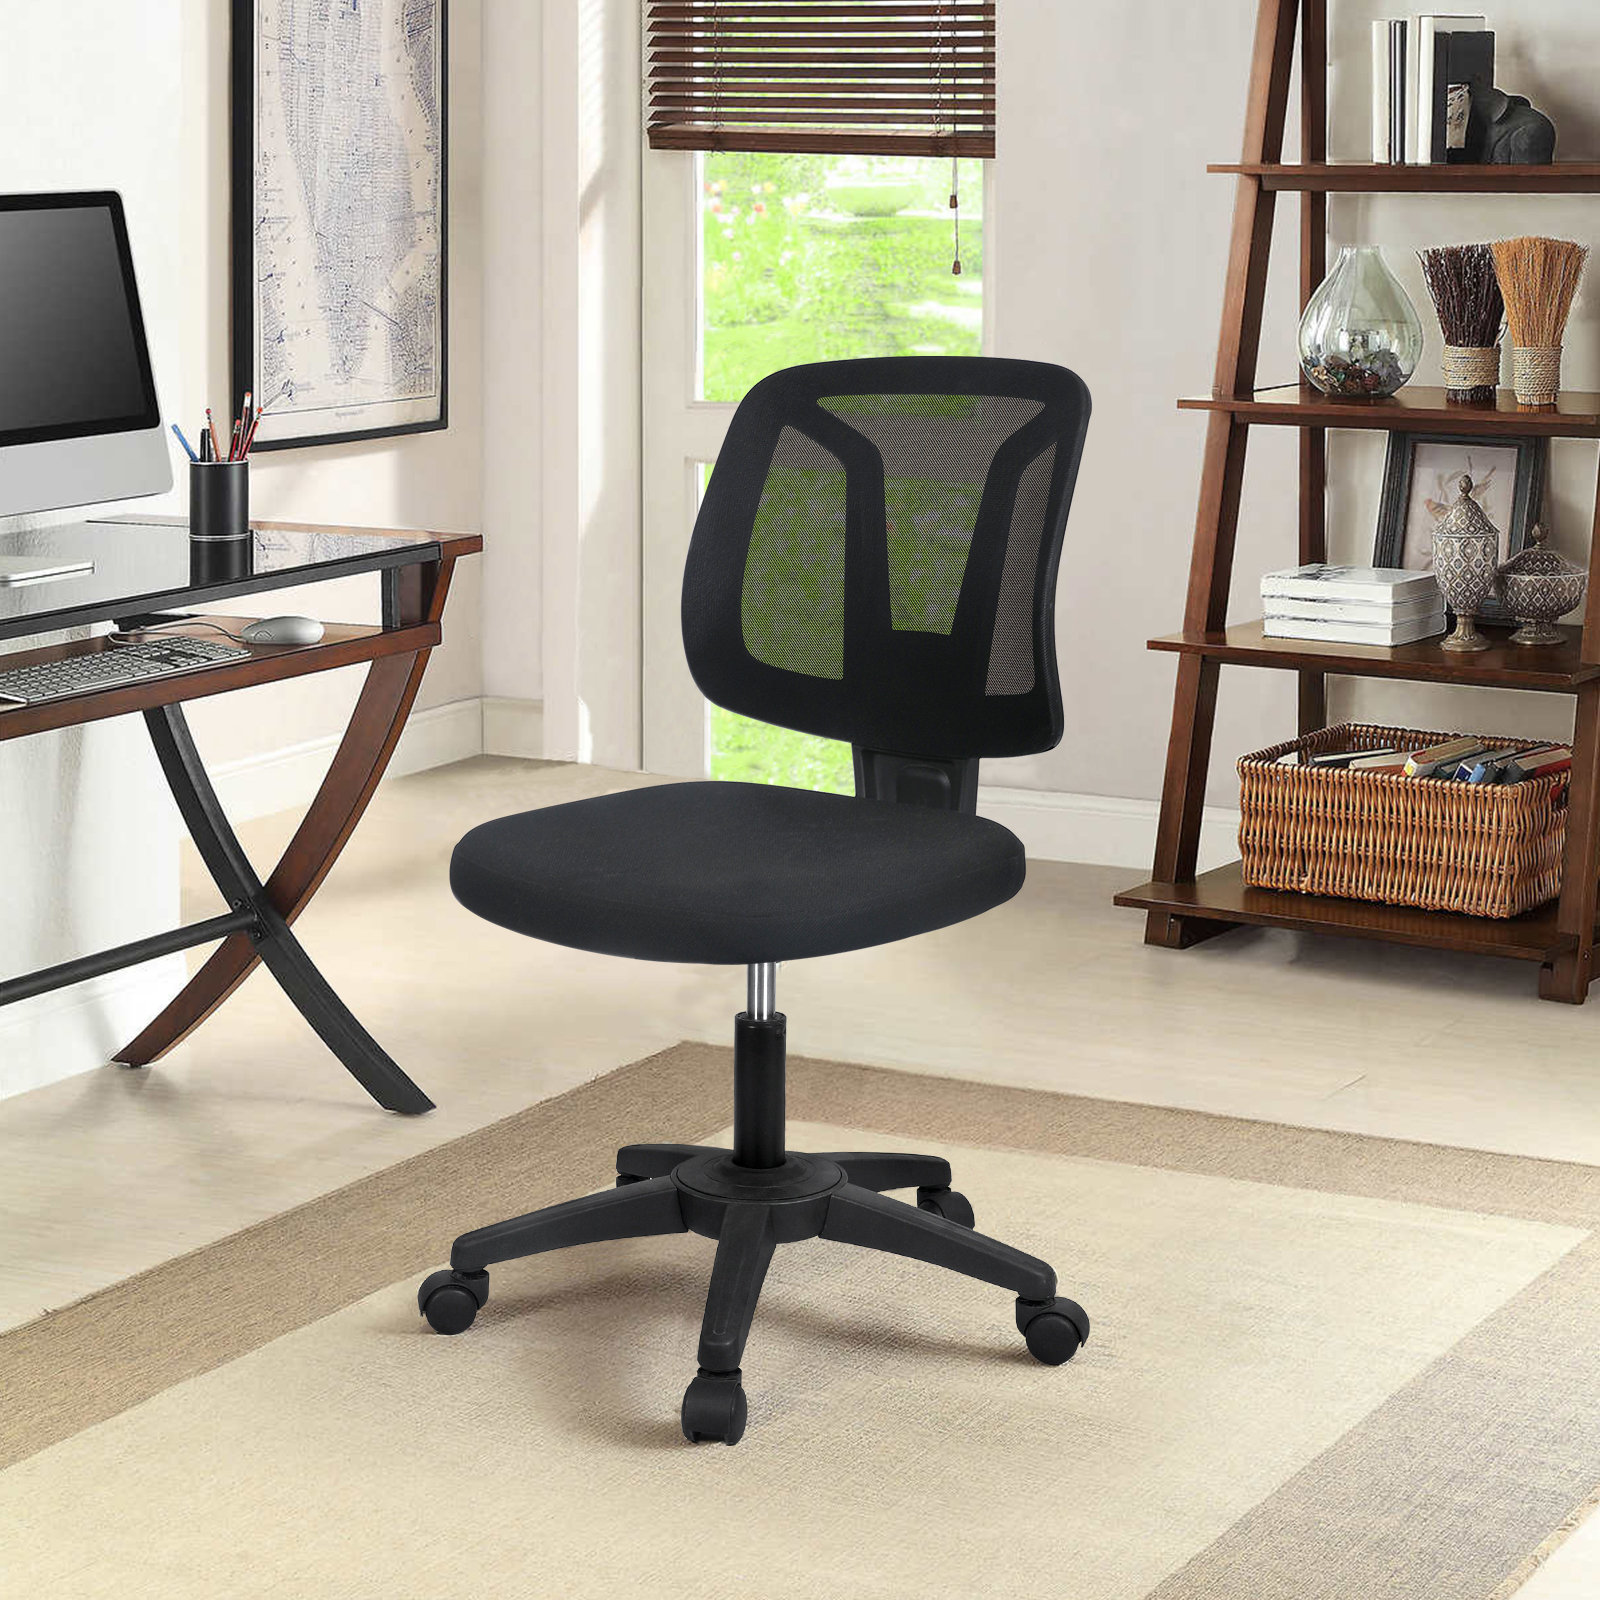 Inbox Zero Armless Office Chair Low Back Desk Chair with Lumbar Support,  Adjustable Height for Small Space & Reviews